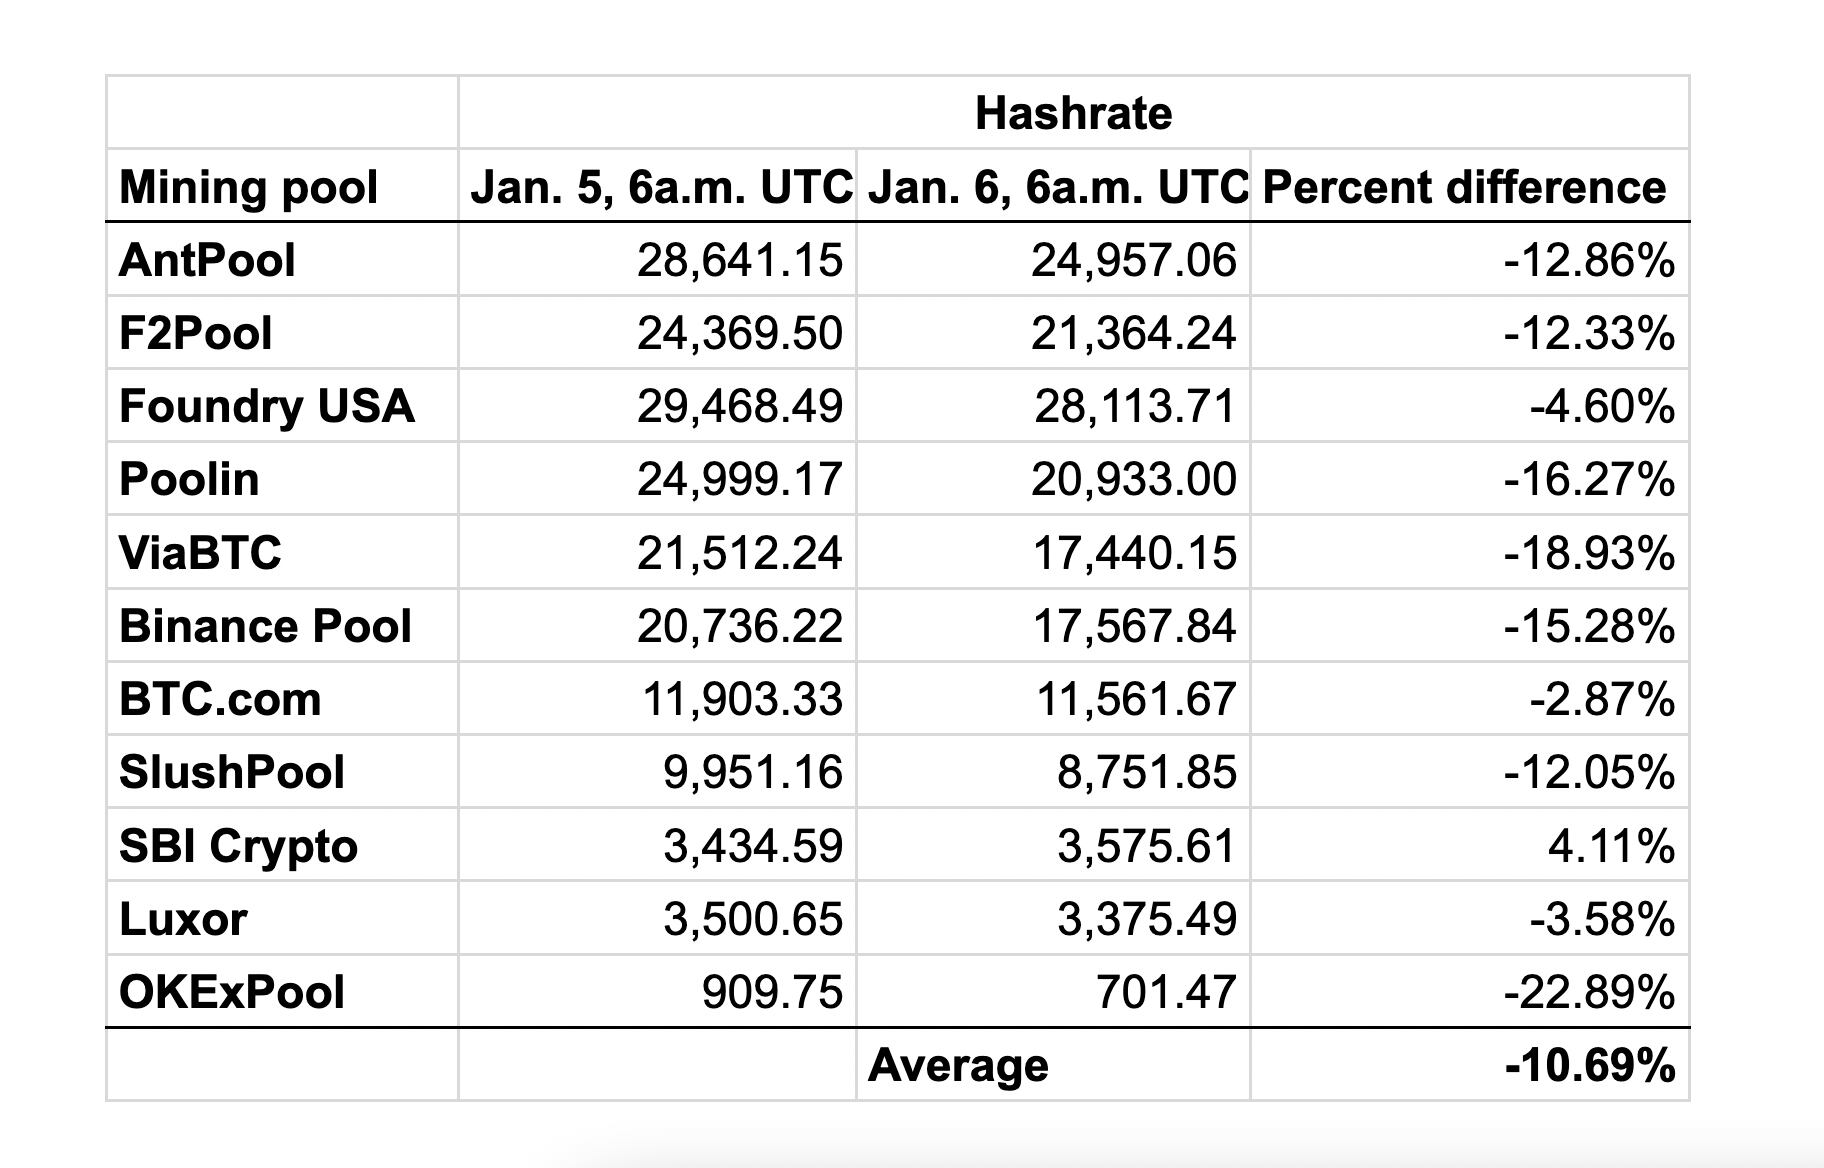 The hashrate of major mining pools has taken a hit as Kazakhstan's internet appears to be down since Jan. 5. (Data from BTC.com)